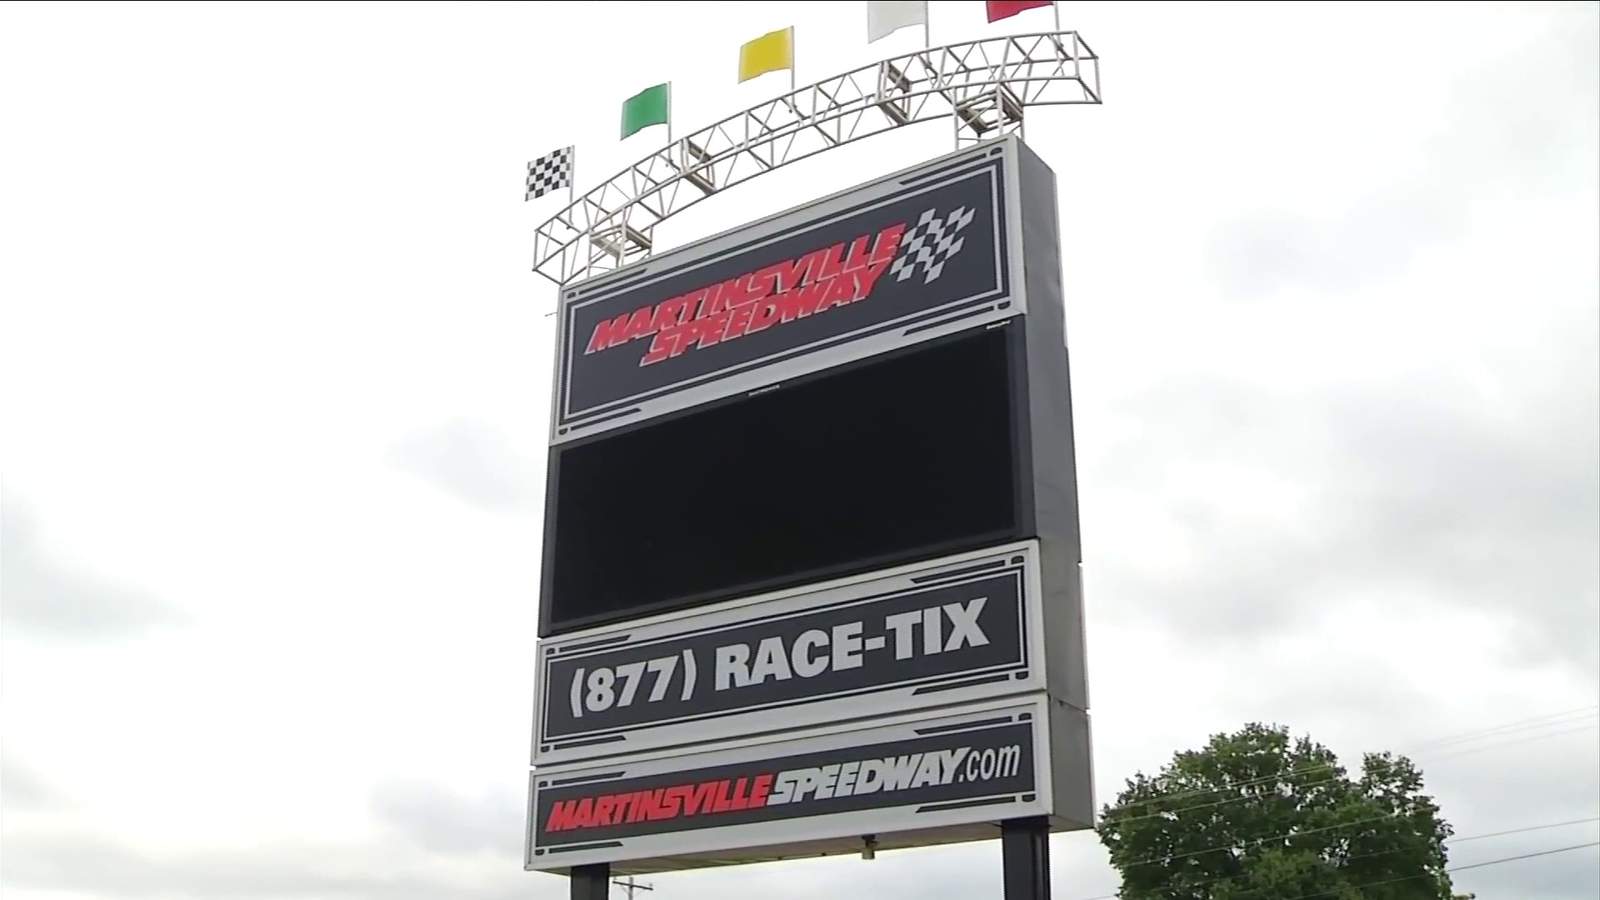 Fan-less races at Martinsville Speedway take financial, emotional toll on local businesses